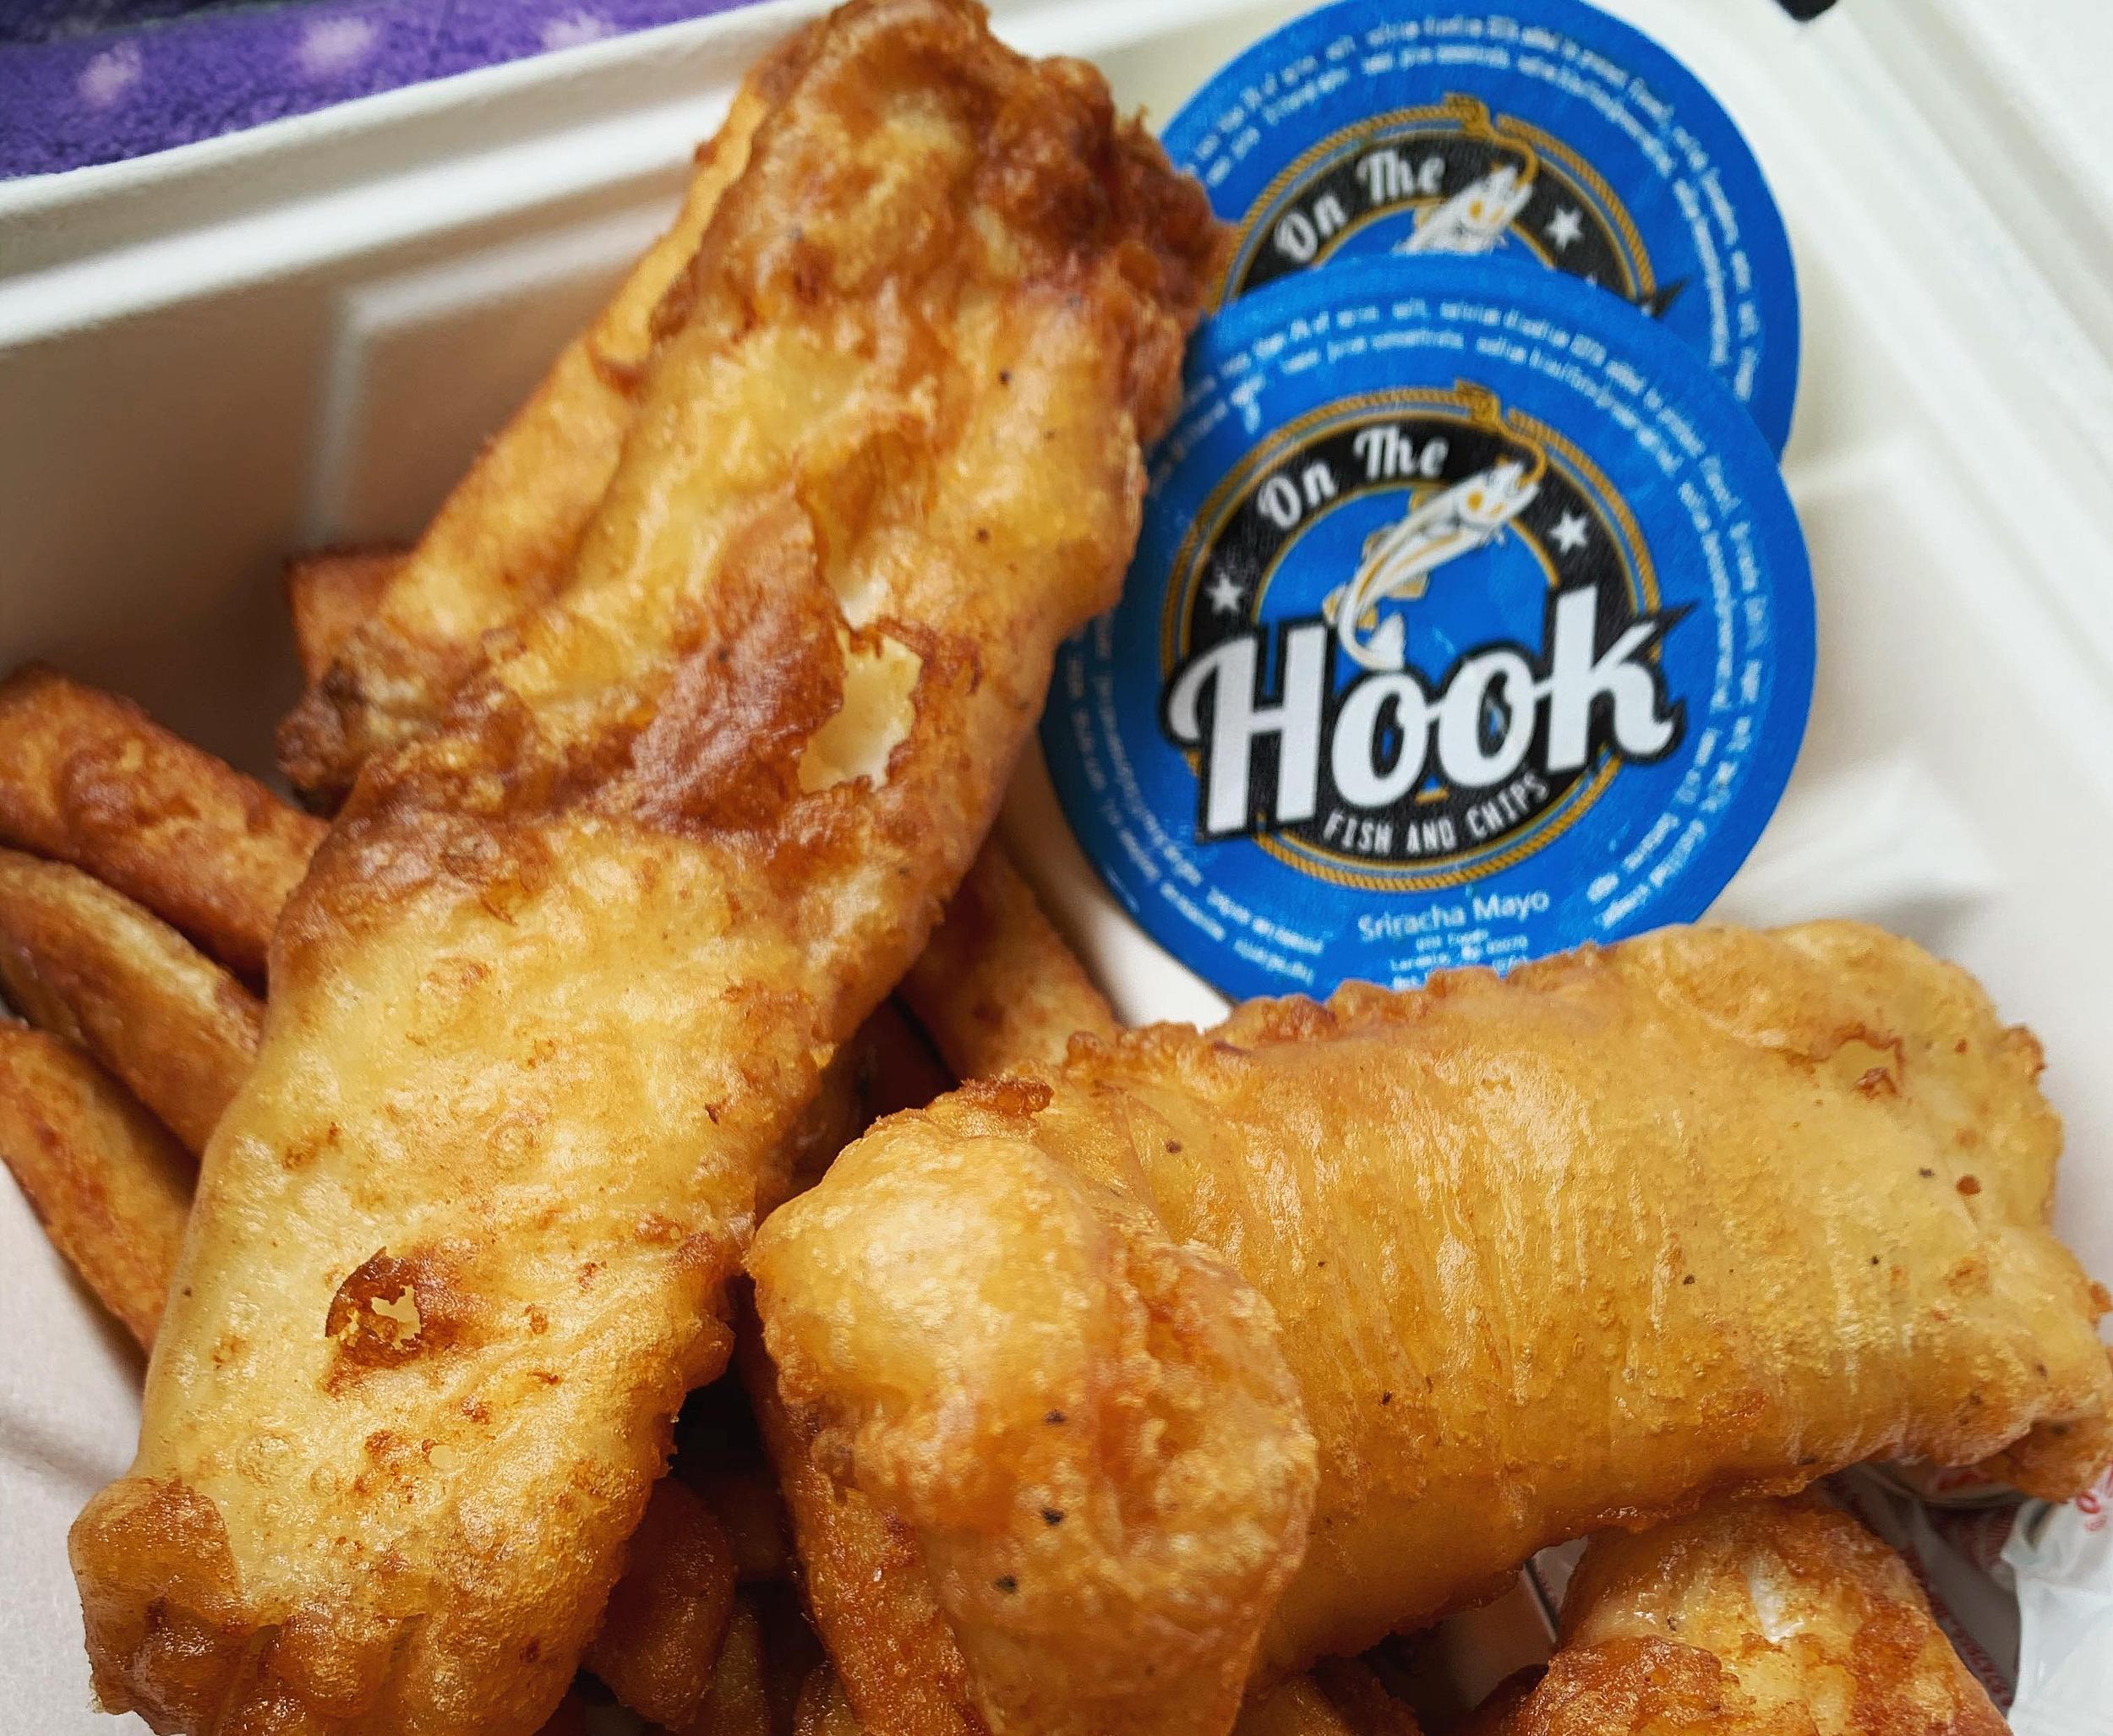 Hooked on fish Mobile fish & chip's